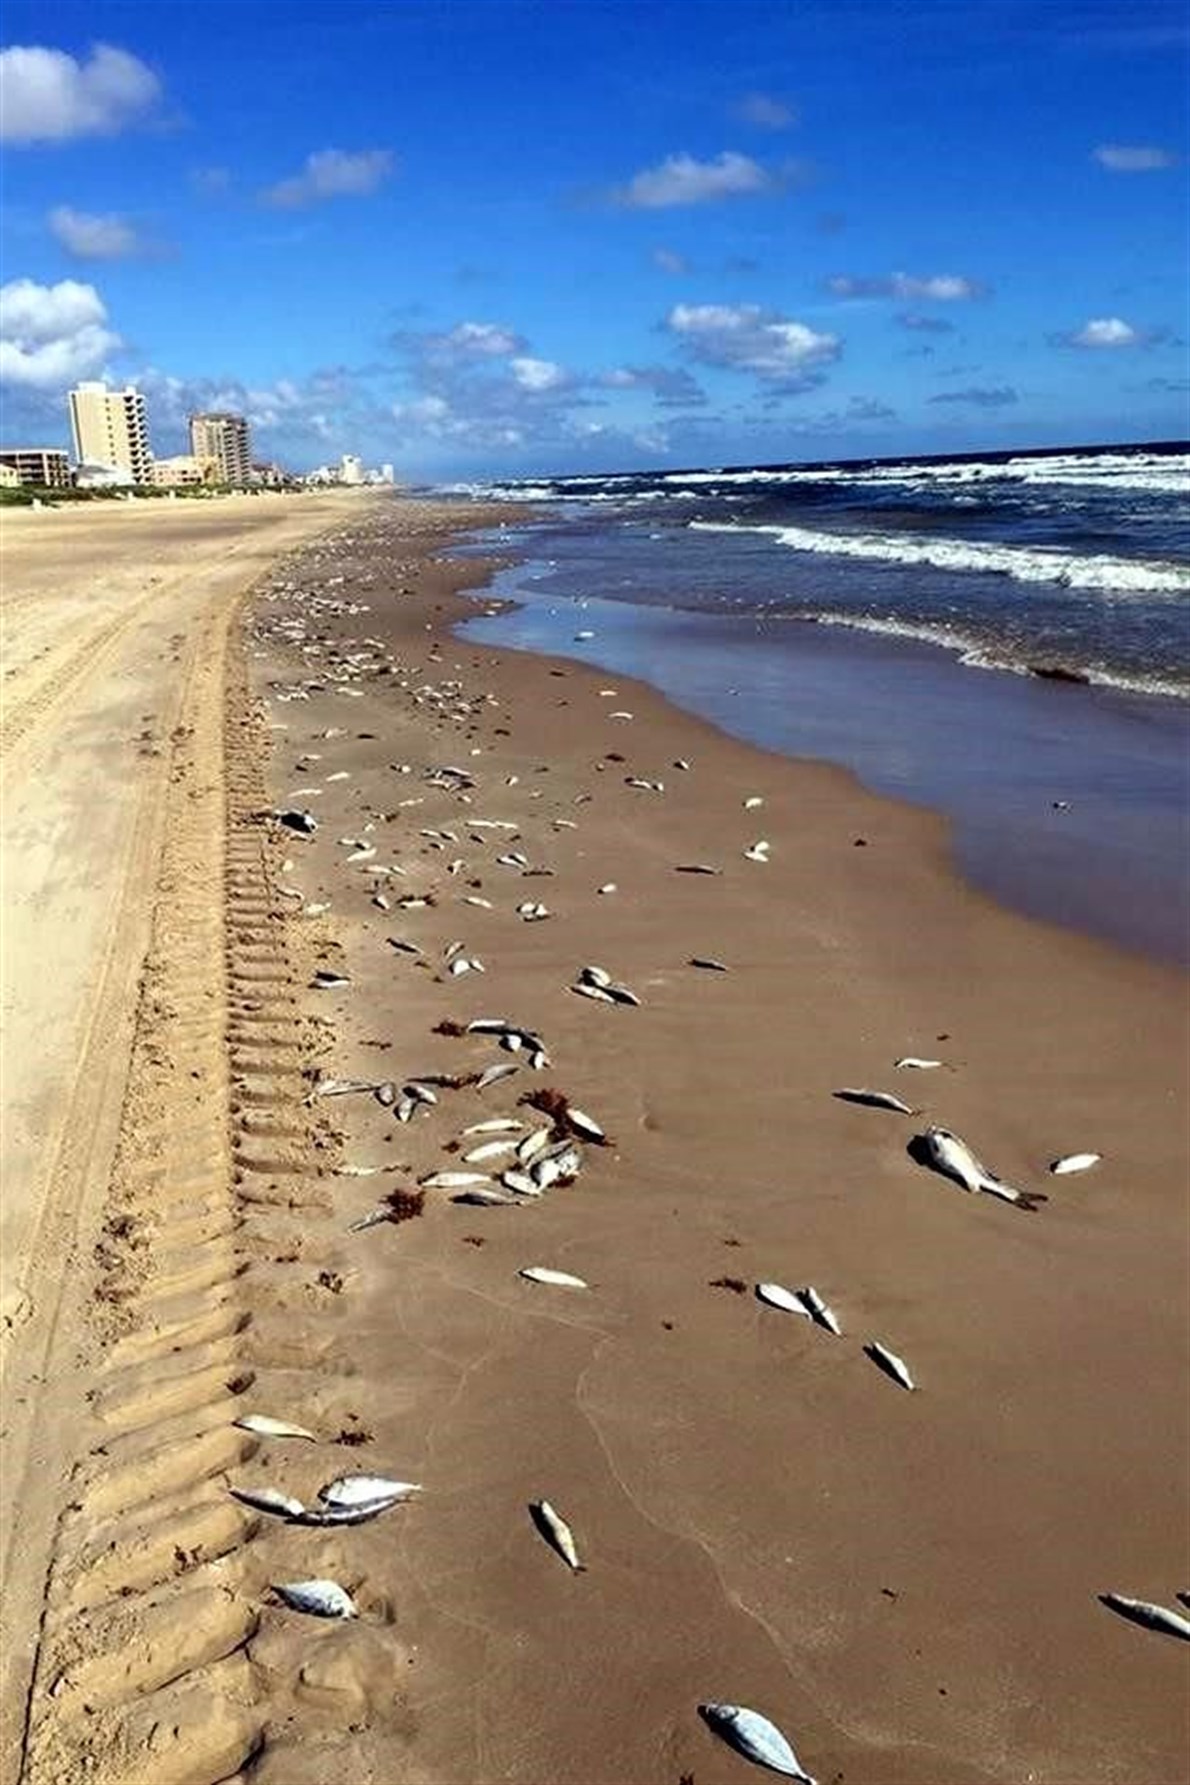 red tide fish kill mexico, red tide fish kill mexico photo, red tide fish kill mexico october 2015, 14 tons fish dead on mexico beach red tide, red tide kills thousand fish in tamaulipas mexico, mass die-off fish red tide, fish kill news october 2015, latest animal die-off 2015